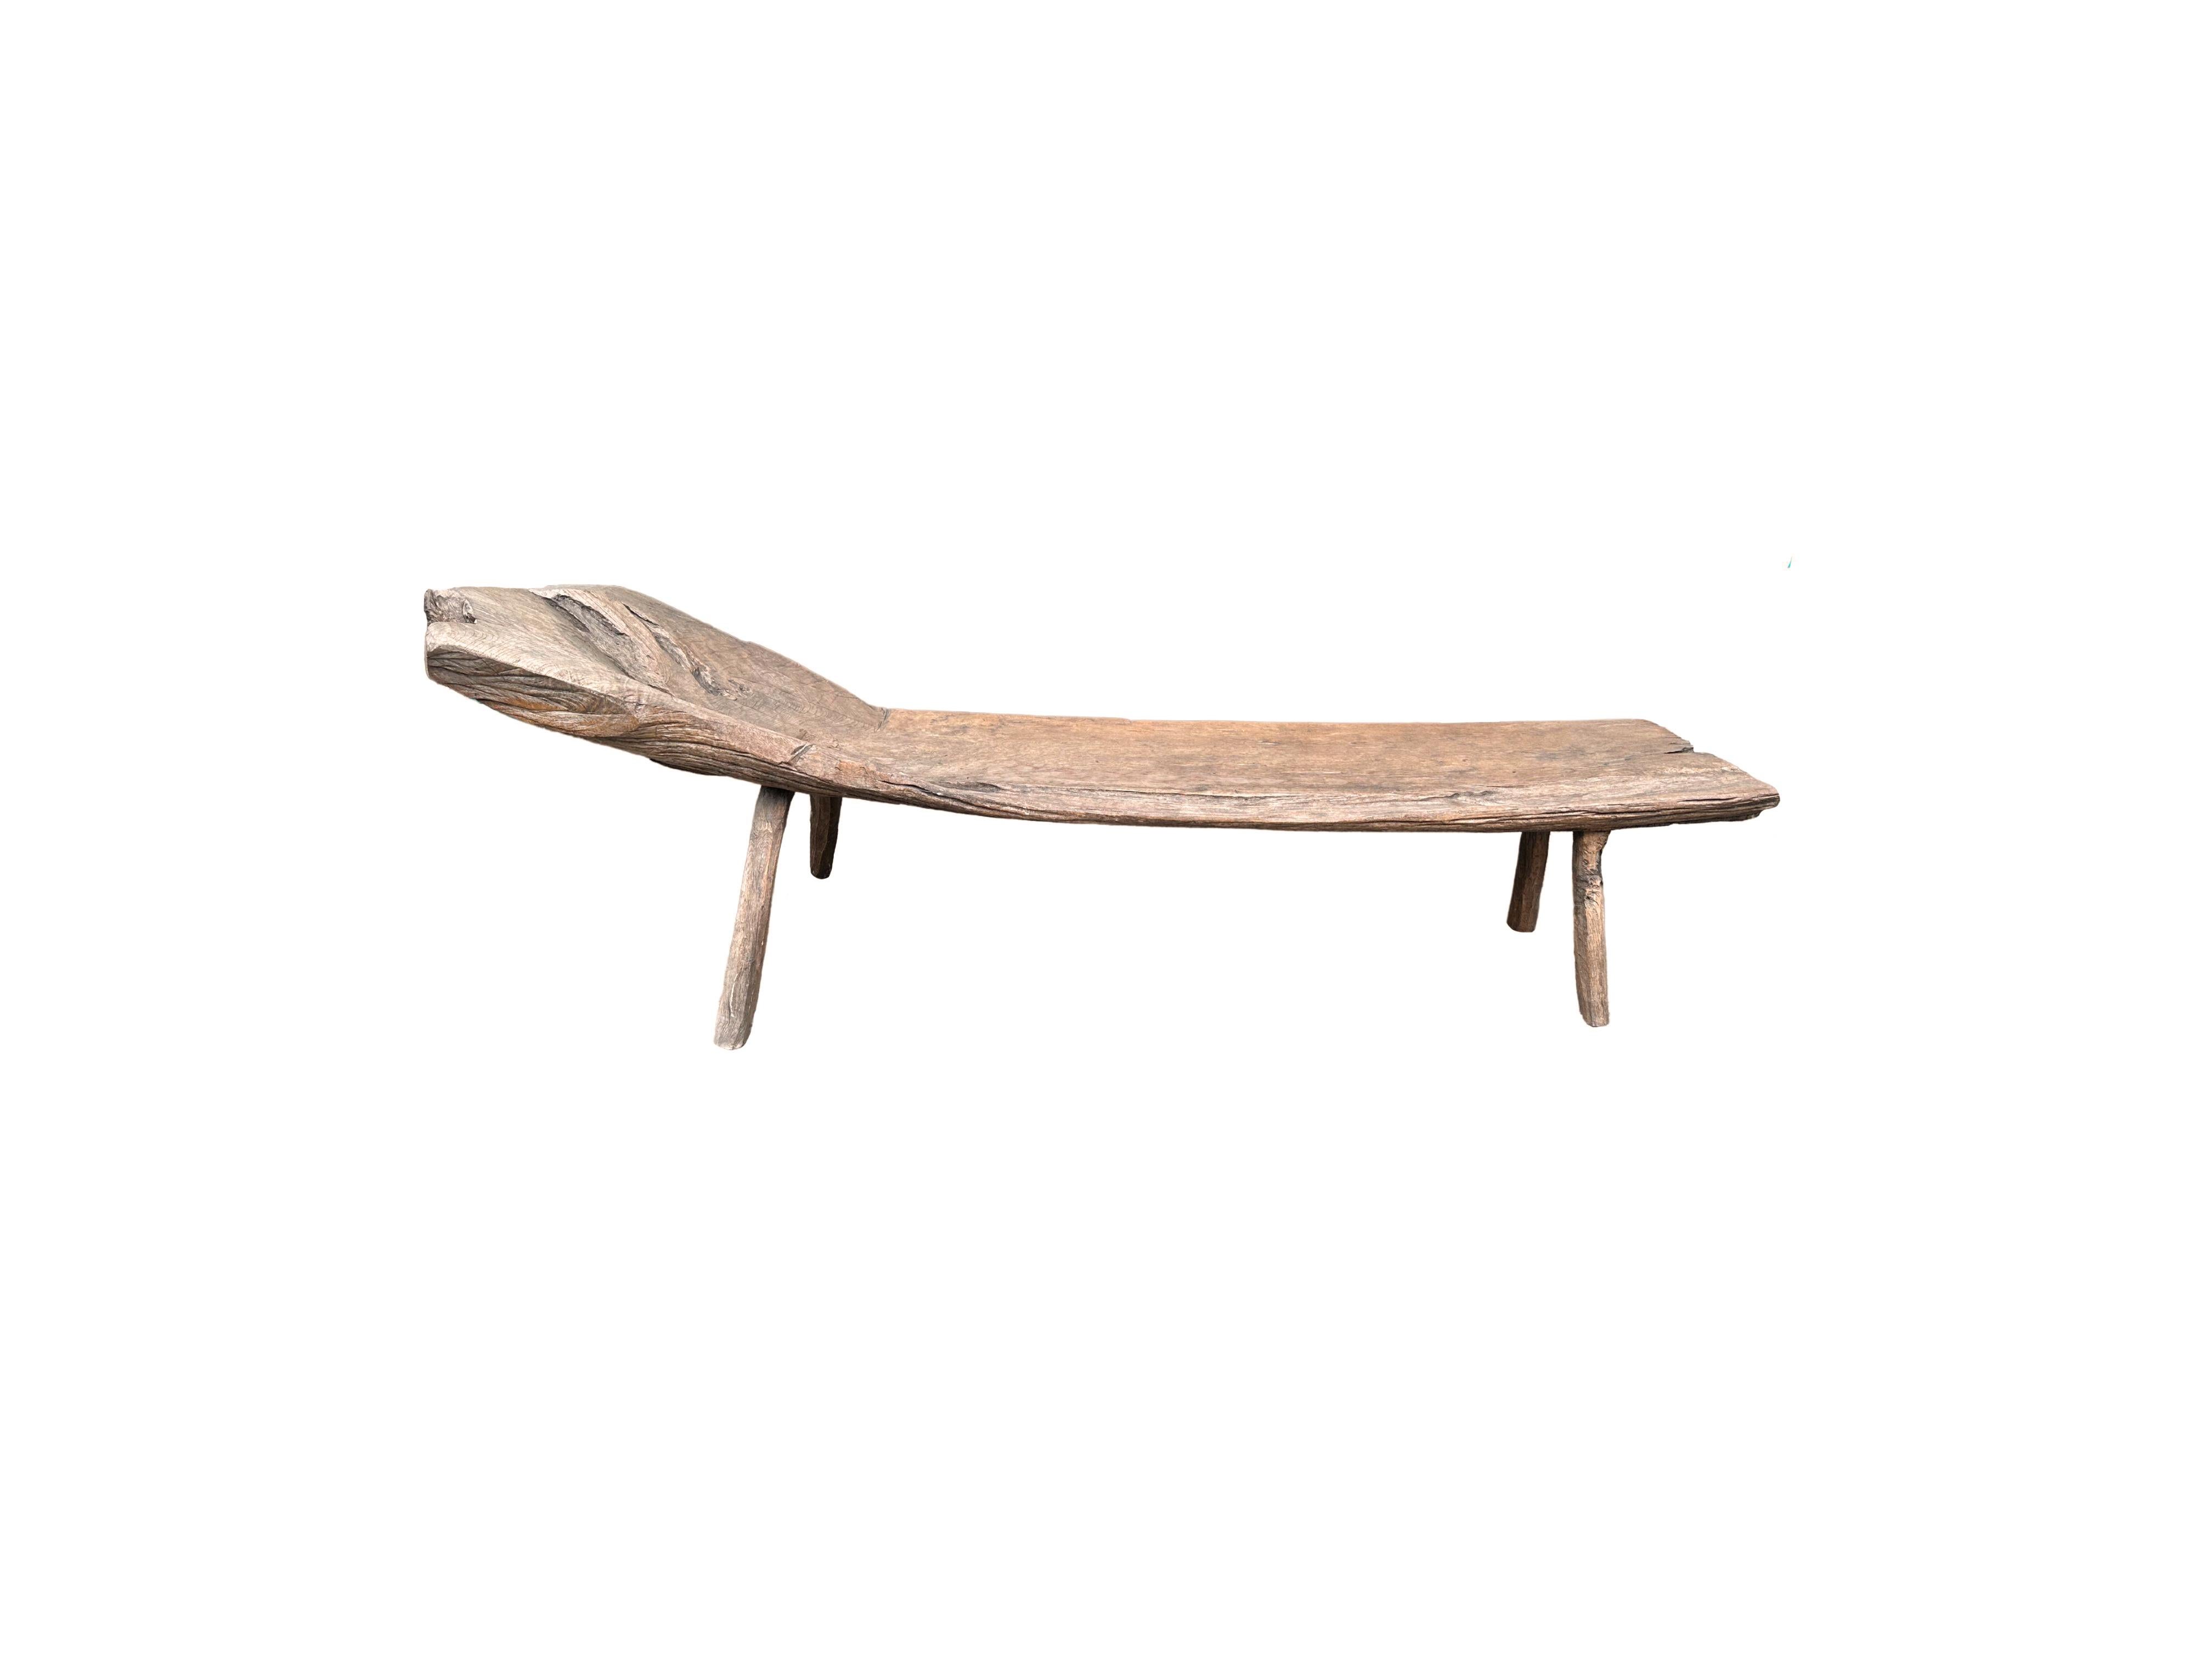 This hand-carved teak wood bench originates from the Island of Madura, off the coast of Northeastern Java. It features a long slender form with angular legs. A wonderful sculptural object with wood textures and shades. The seat was carved from a